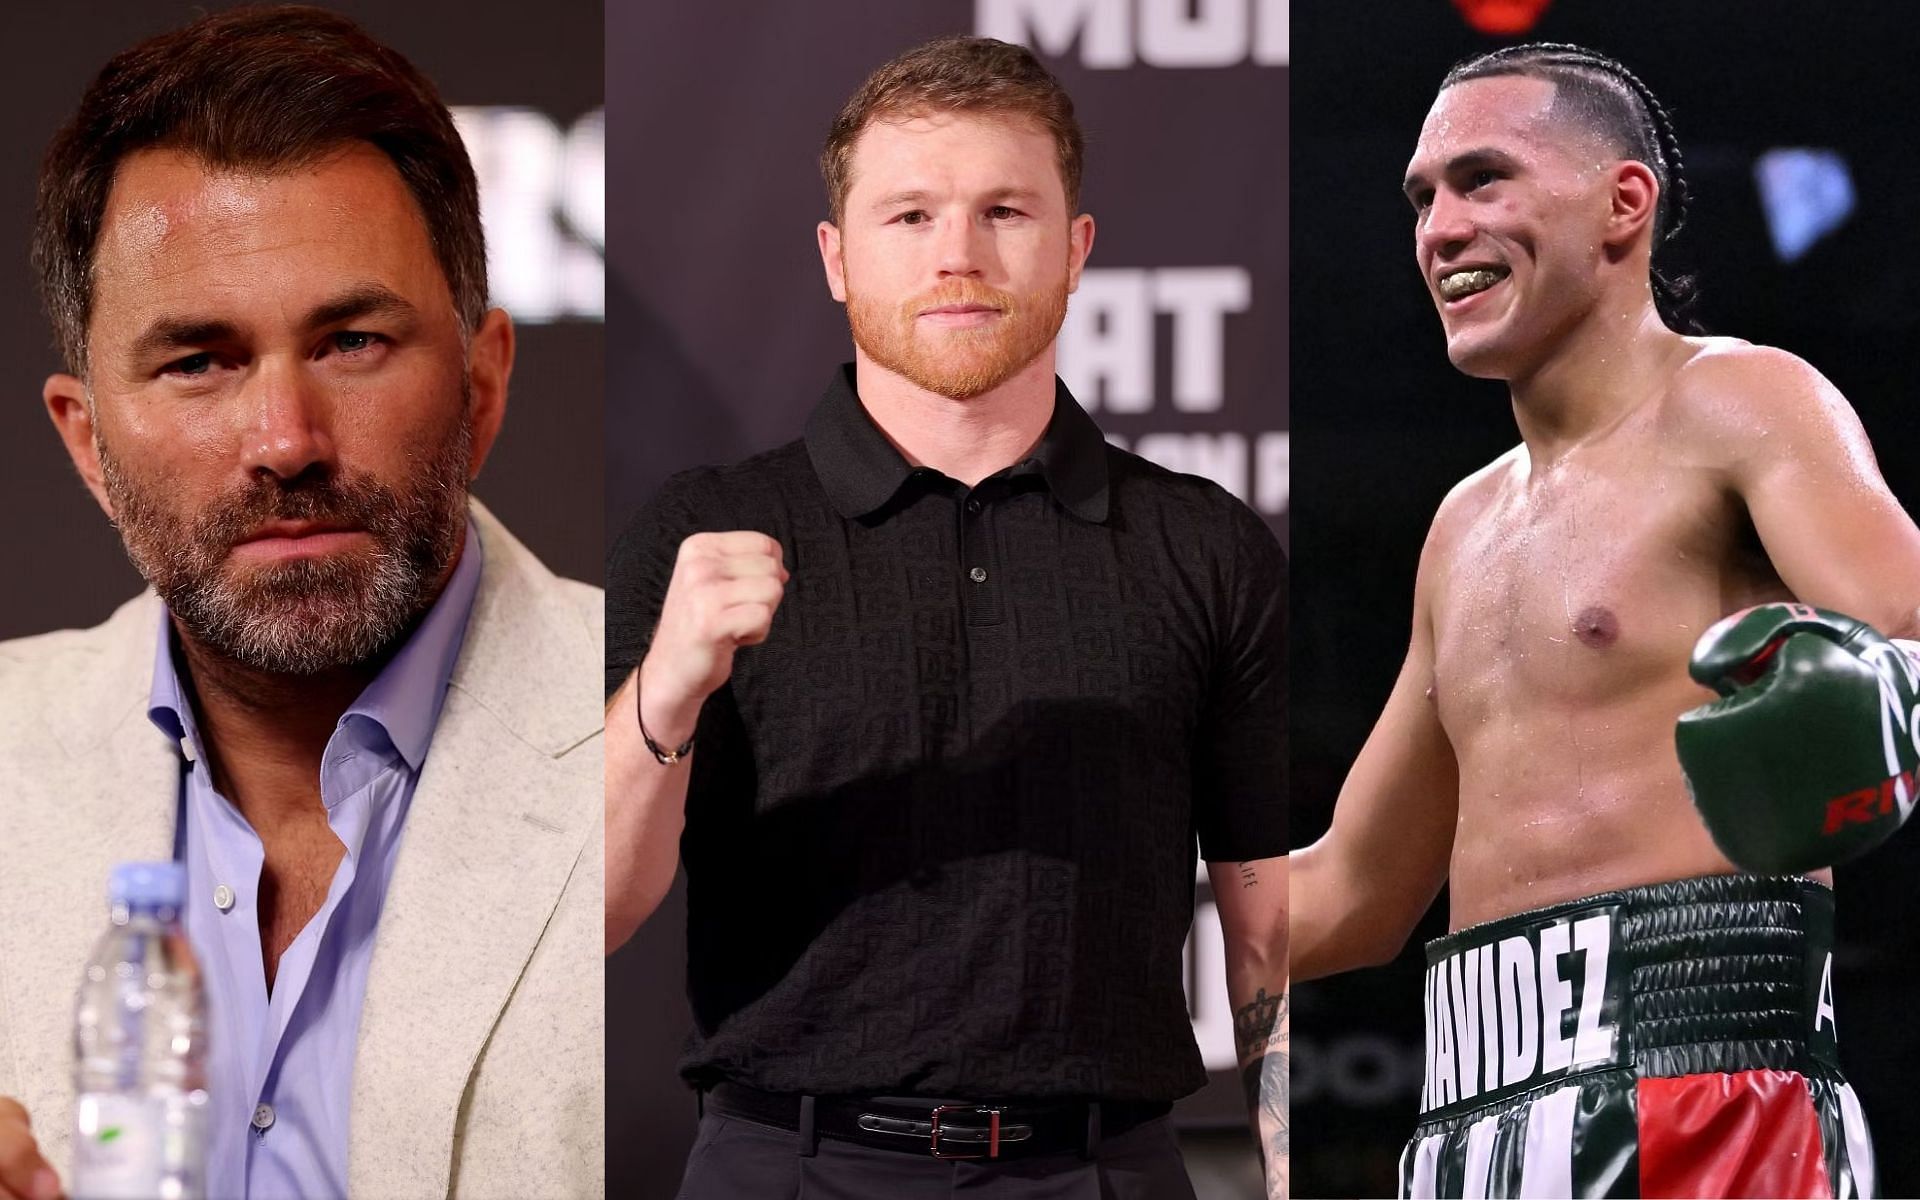 Eddie Hearn (left) shares thoughts on Canelo Alvarez (middle) demanding $200 million to fight David Benavidez (right) [Images Courtesy: @GettyImages]